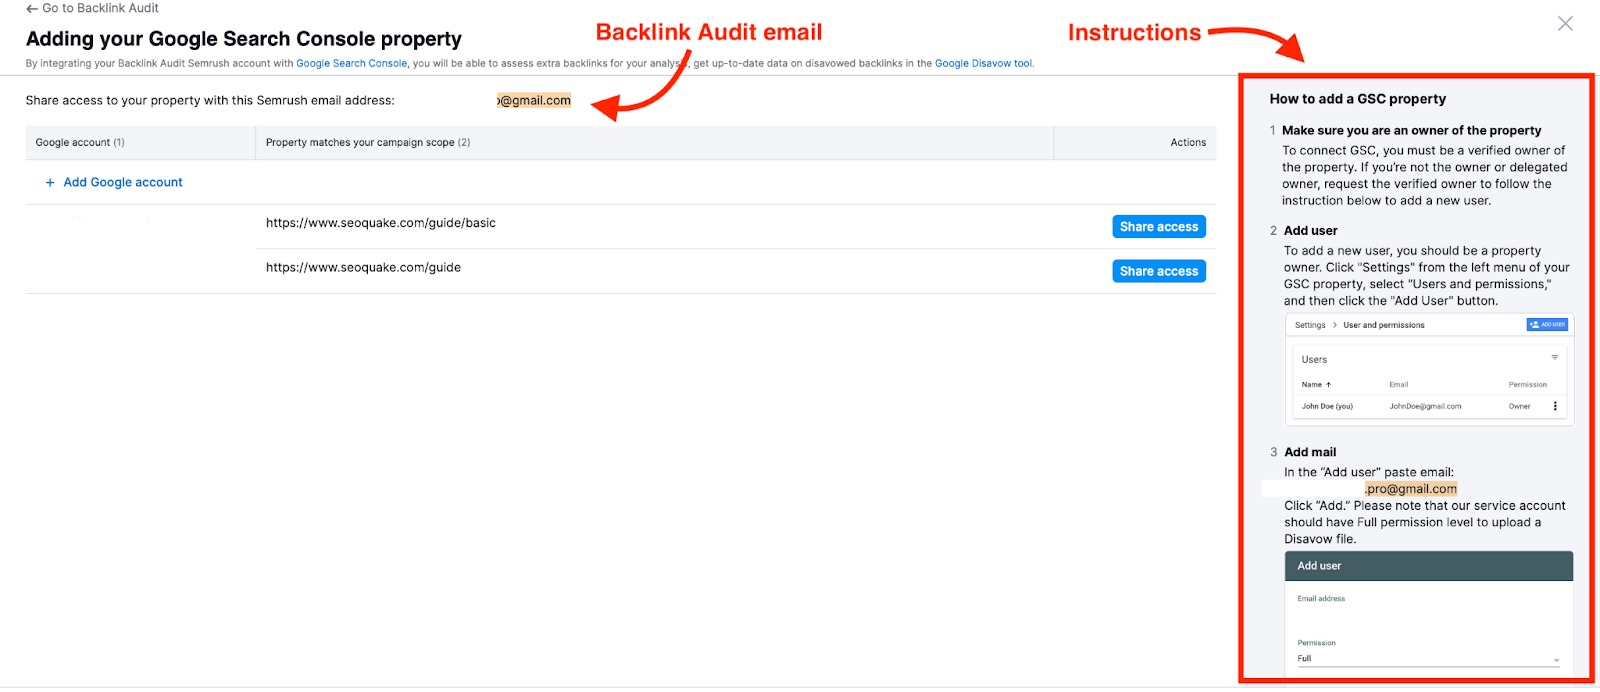 Connecting Backlink Audit to Google Accounts image 3